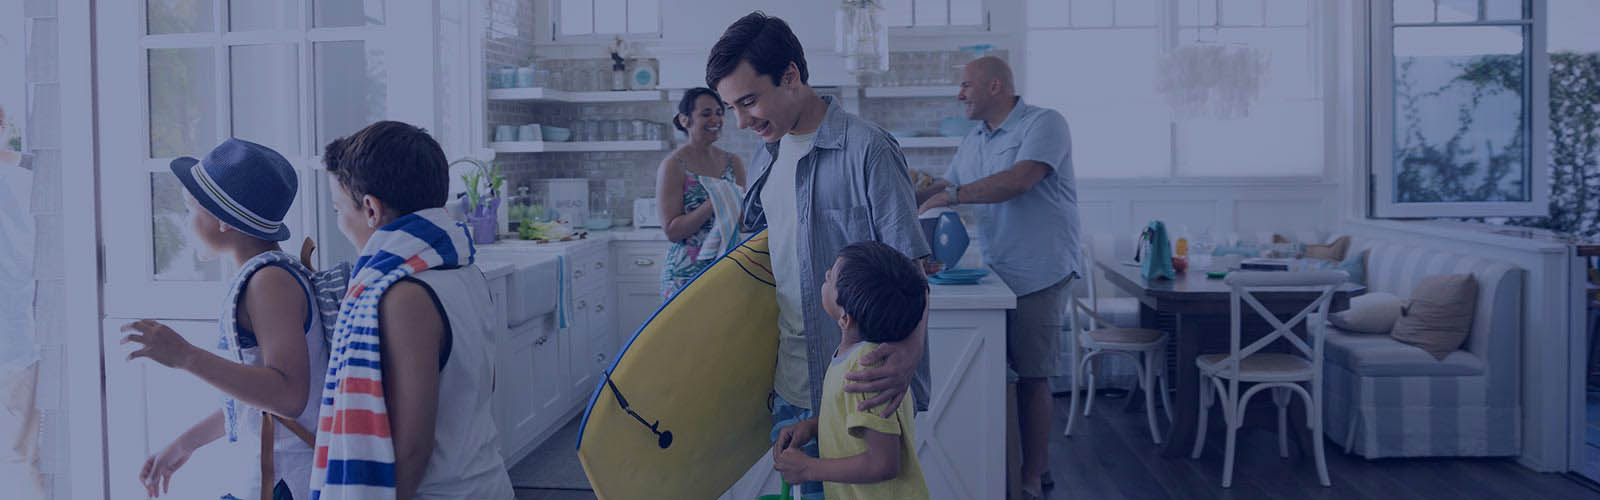 Family with body board and beach towel leaving beach house